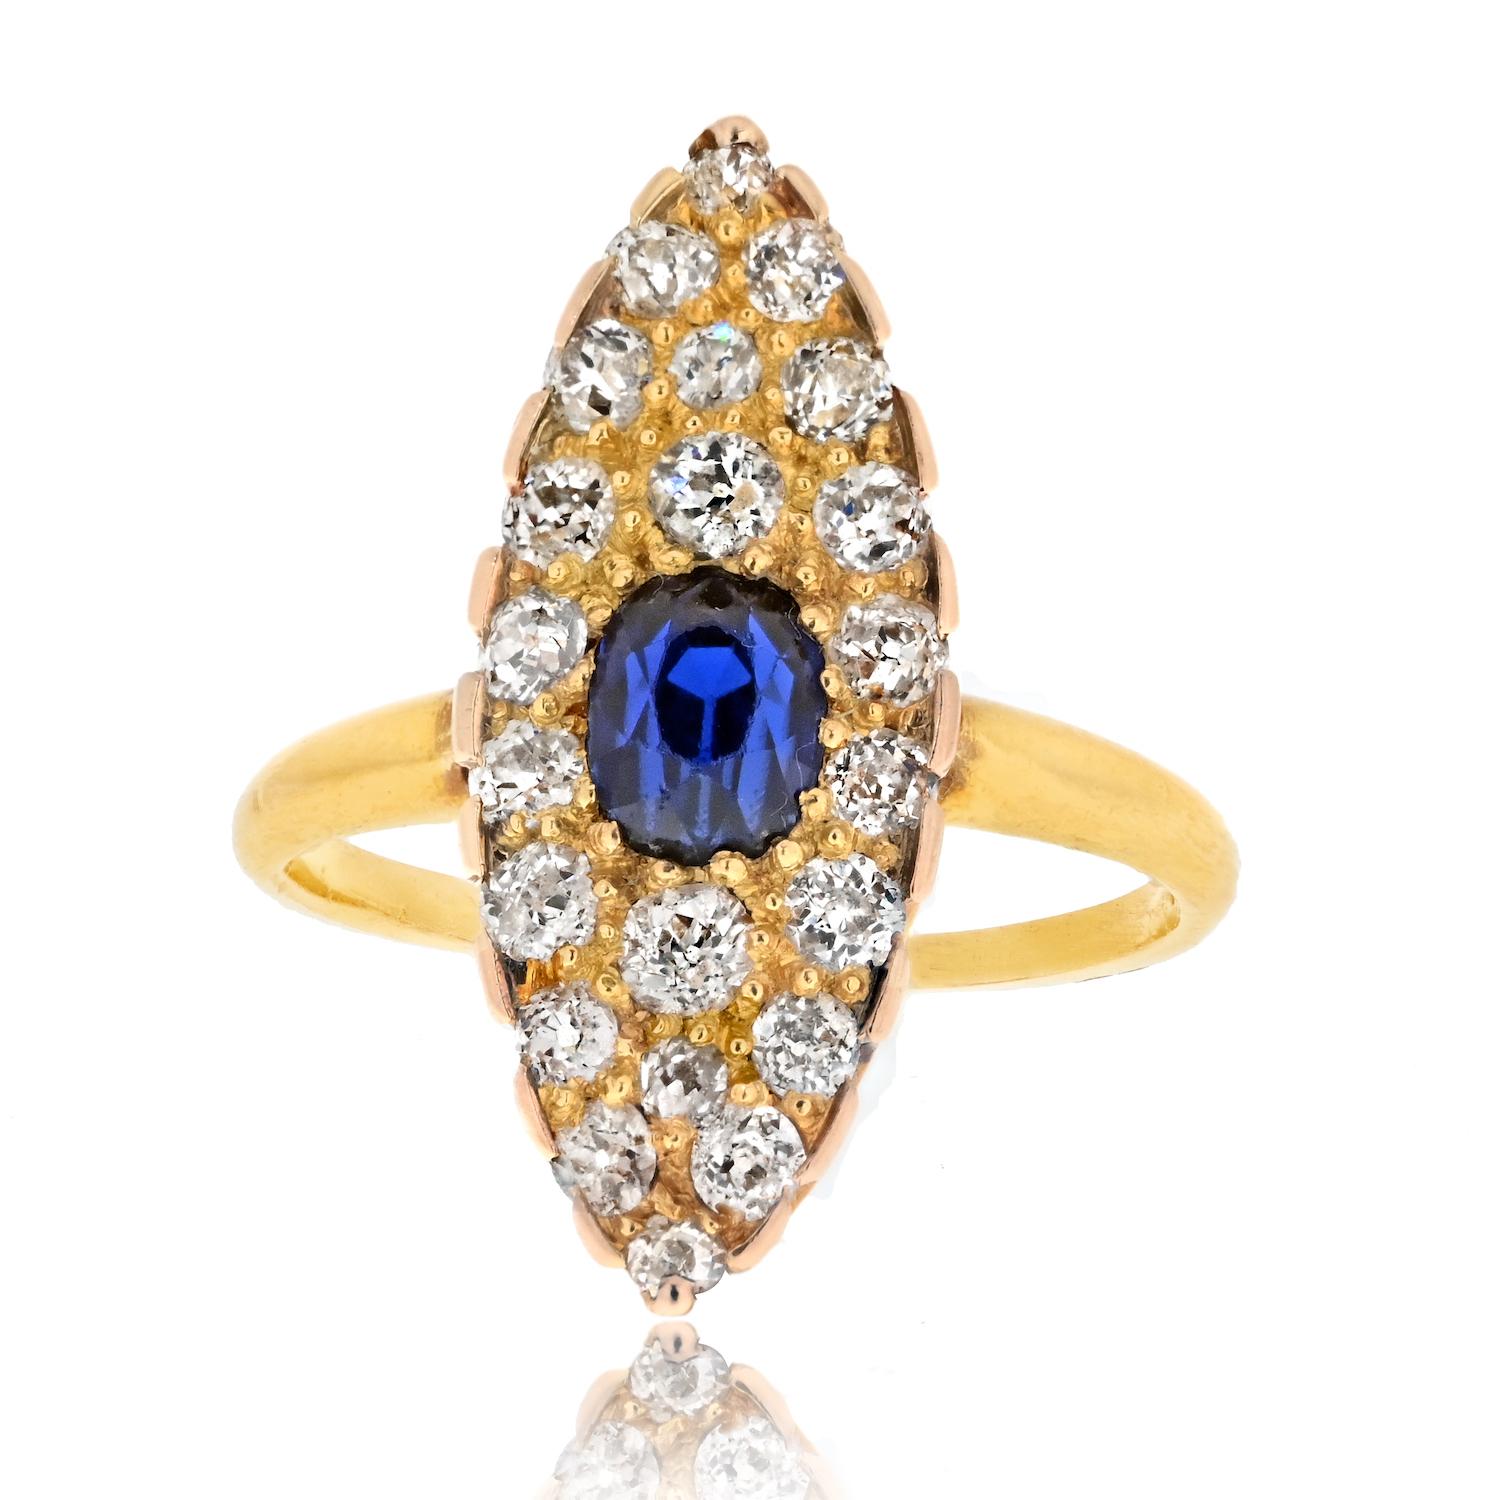 Adorn your finger with the timeless elegance of this Tiffany & Co. 14K Yellow Gold Burma Sapphire and Old Cut Diamond Navette Ring. This vintage piece, hailing from the early 1900s, exudes an air of refinement that has stood the test of time.

At